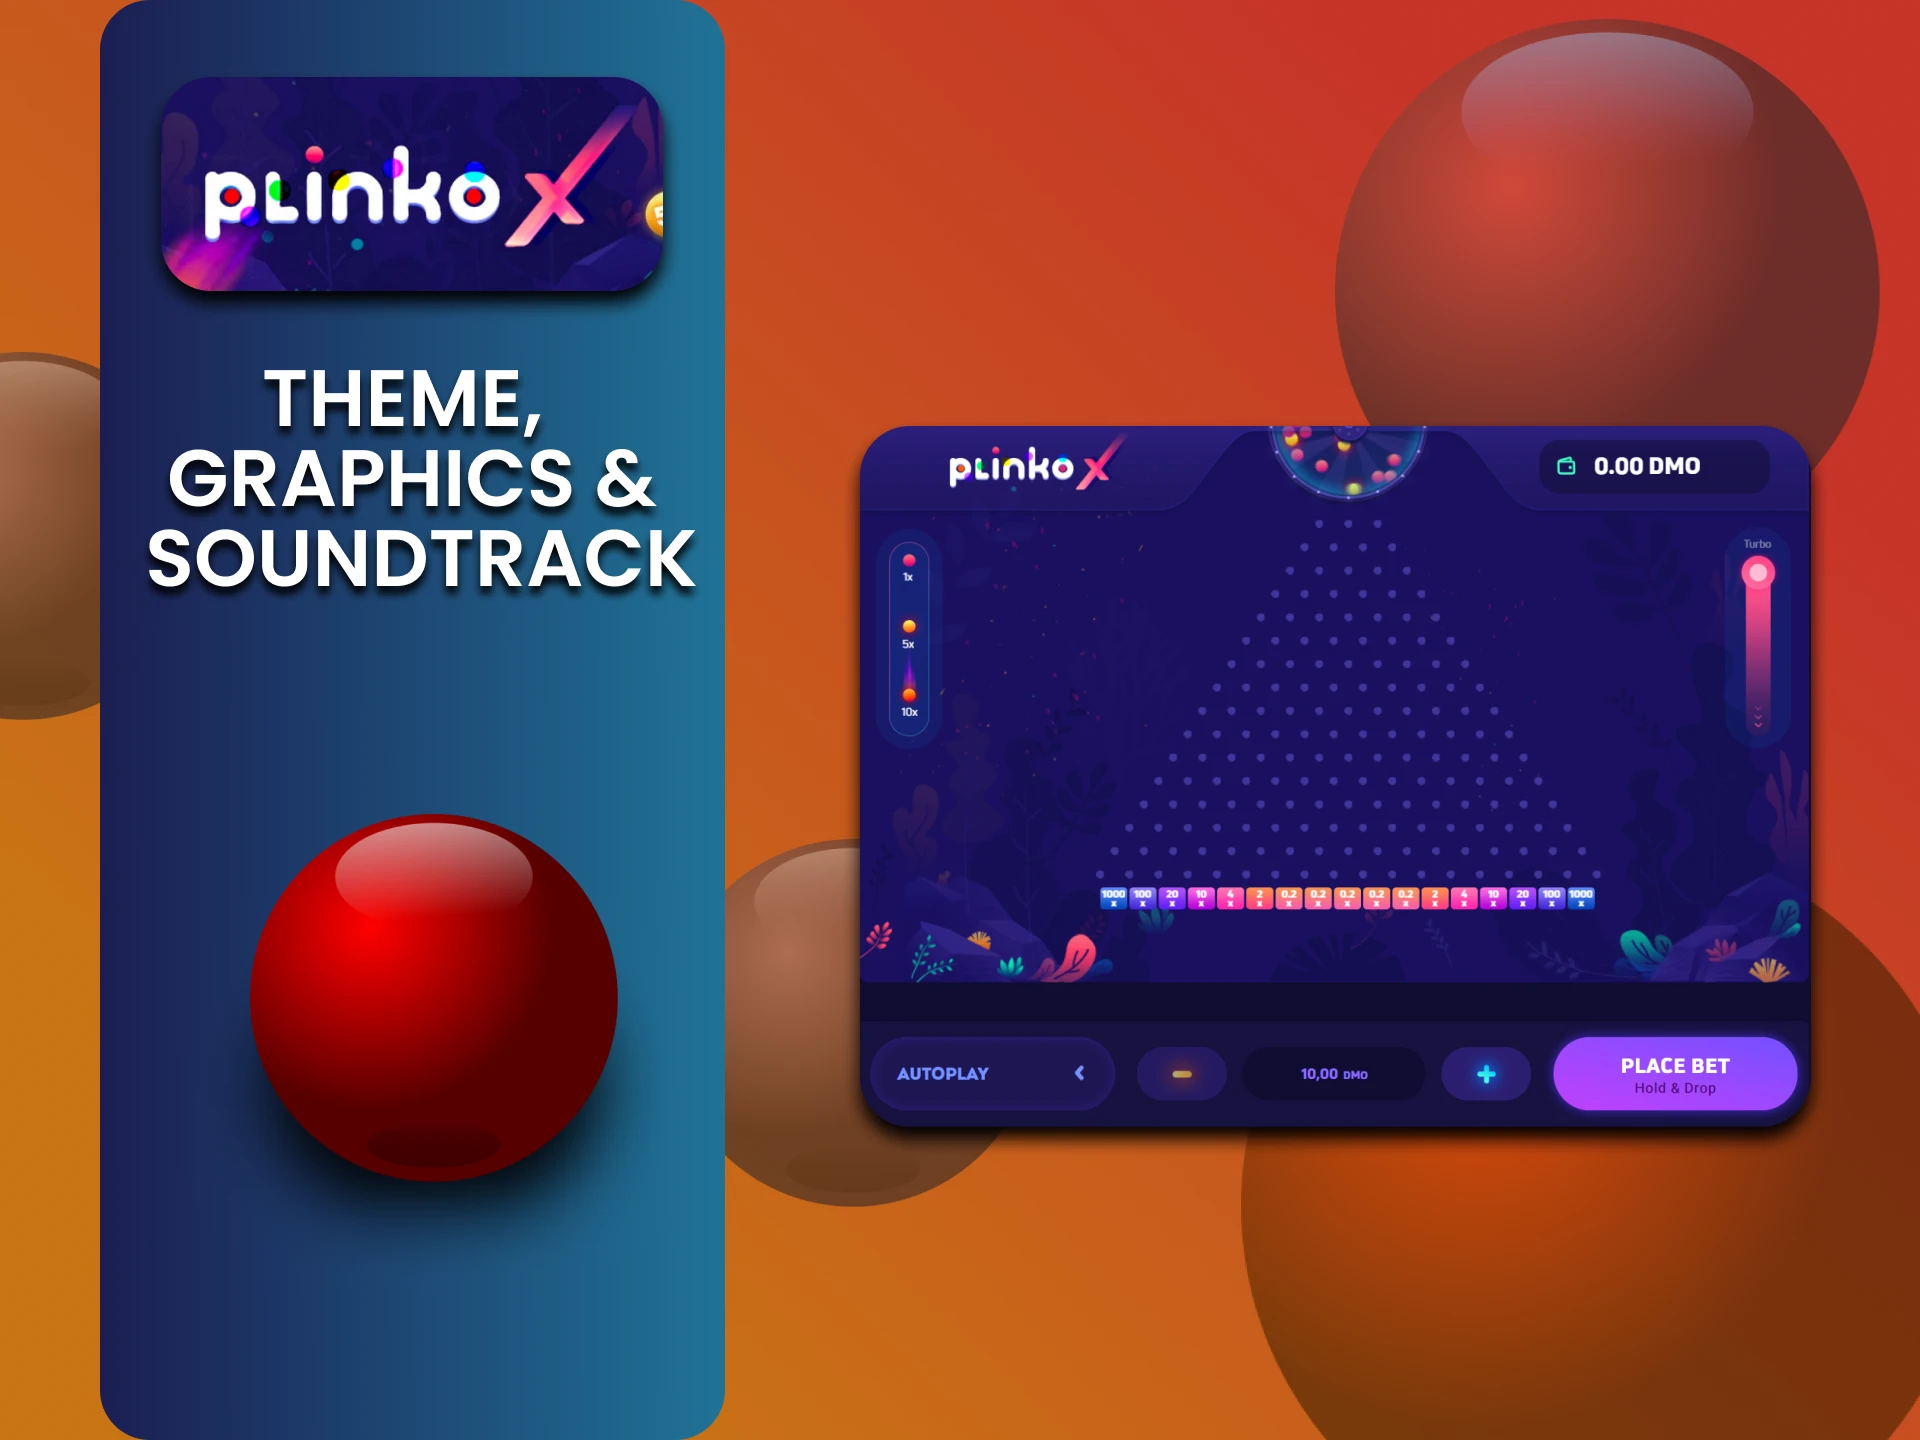 We will tell you what the Plinko X game looks like.